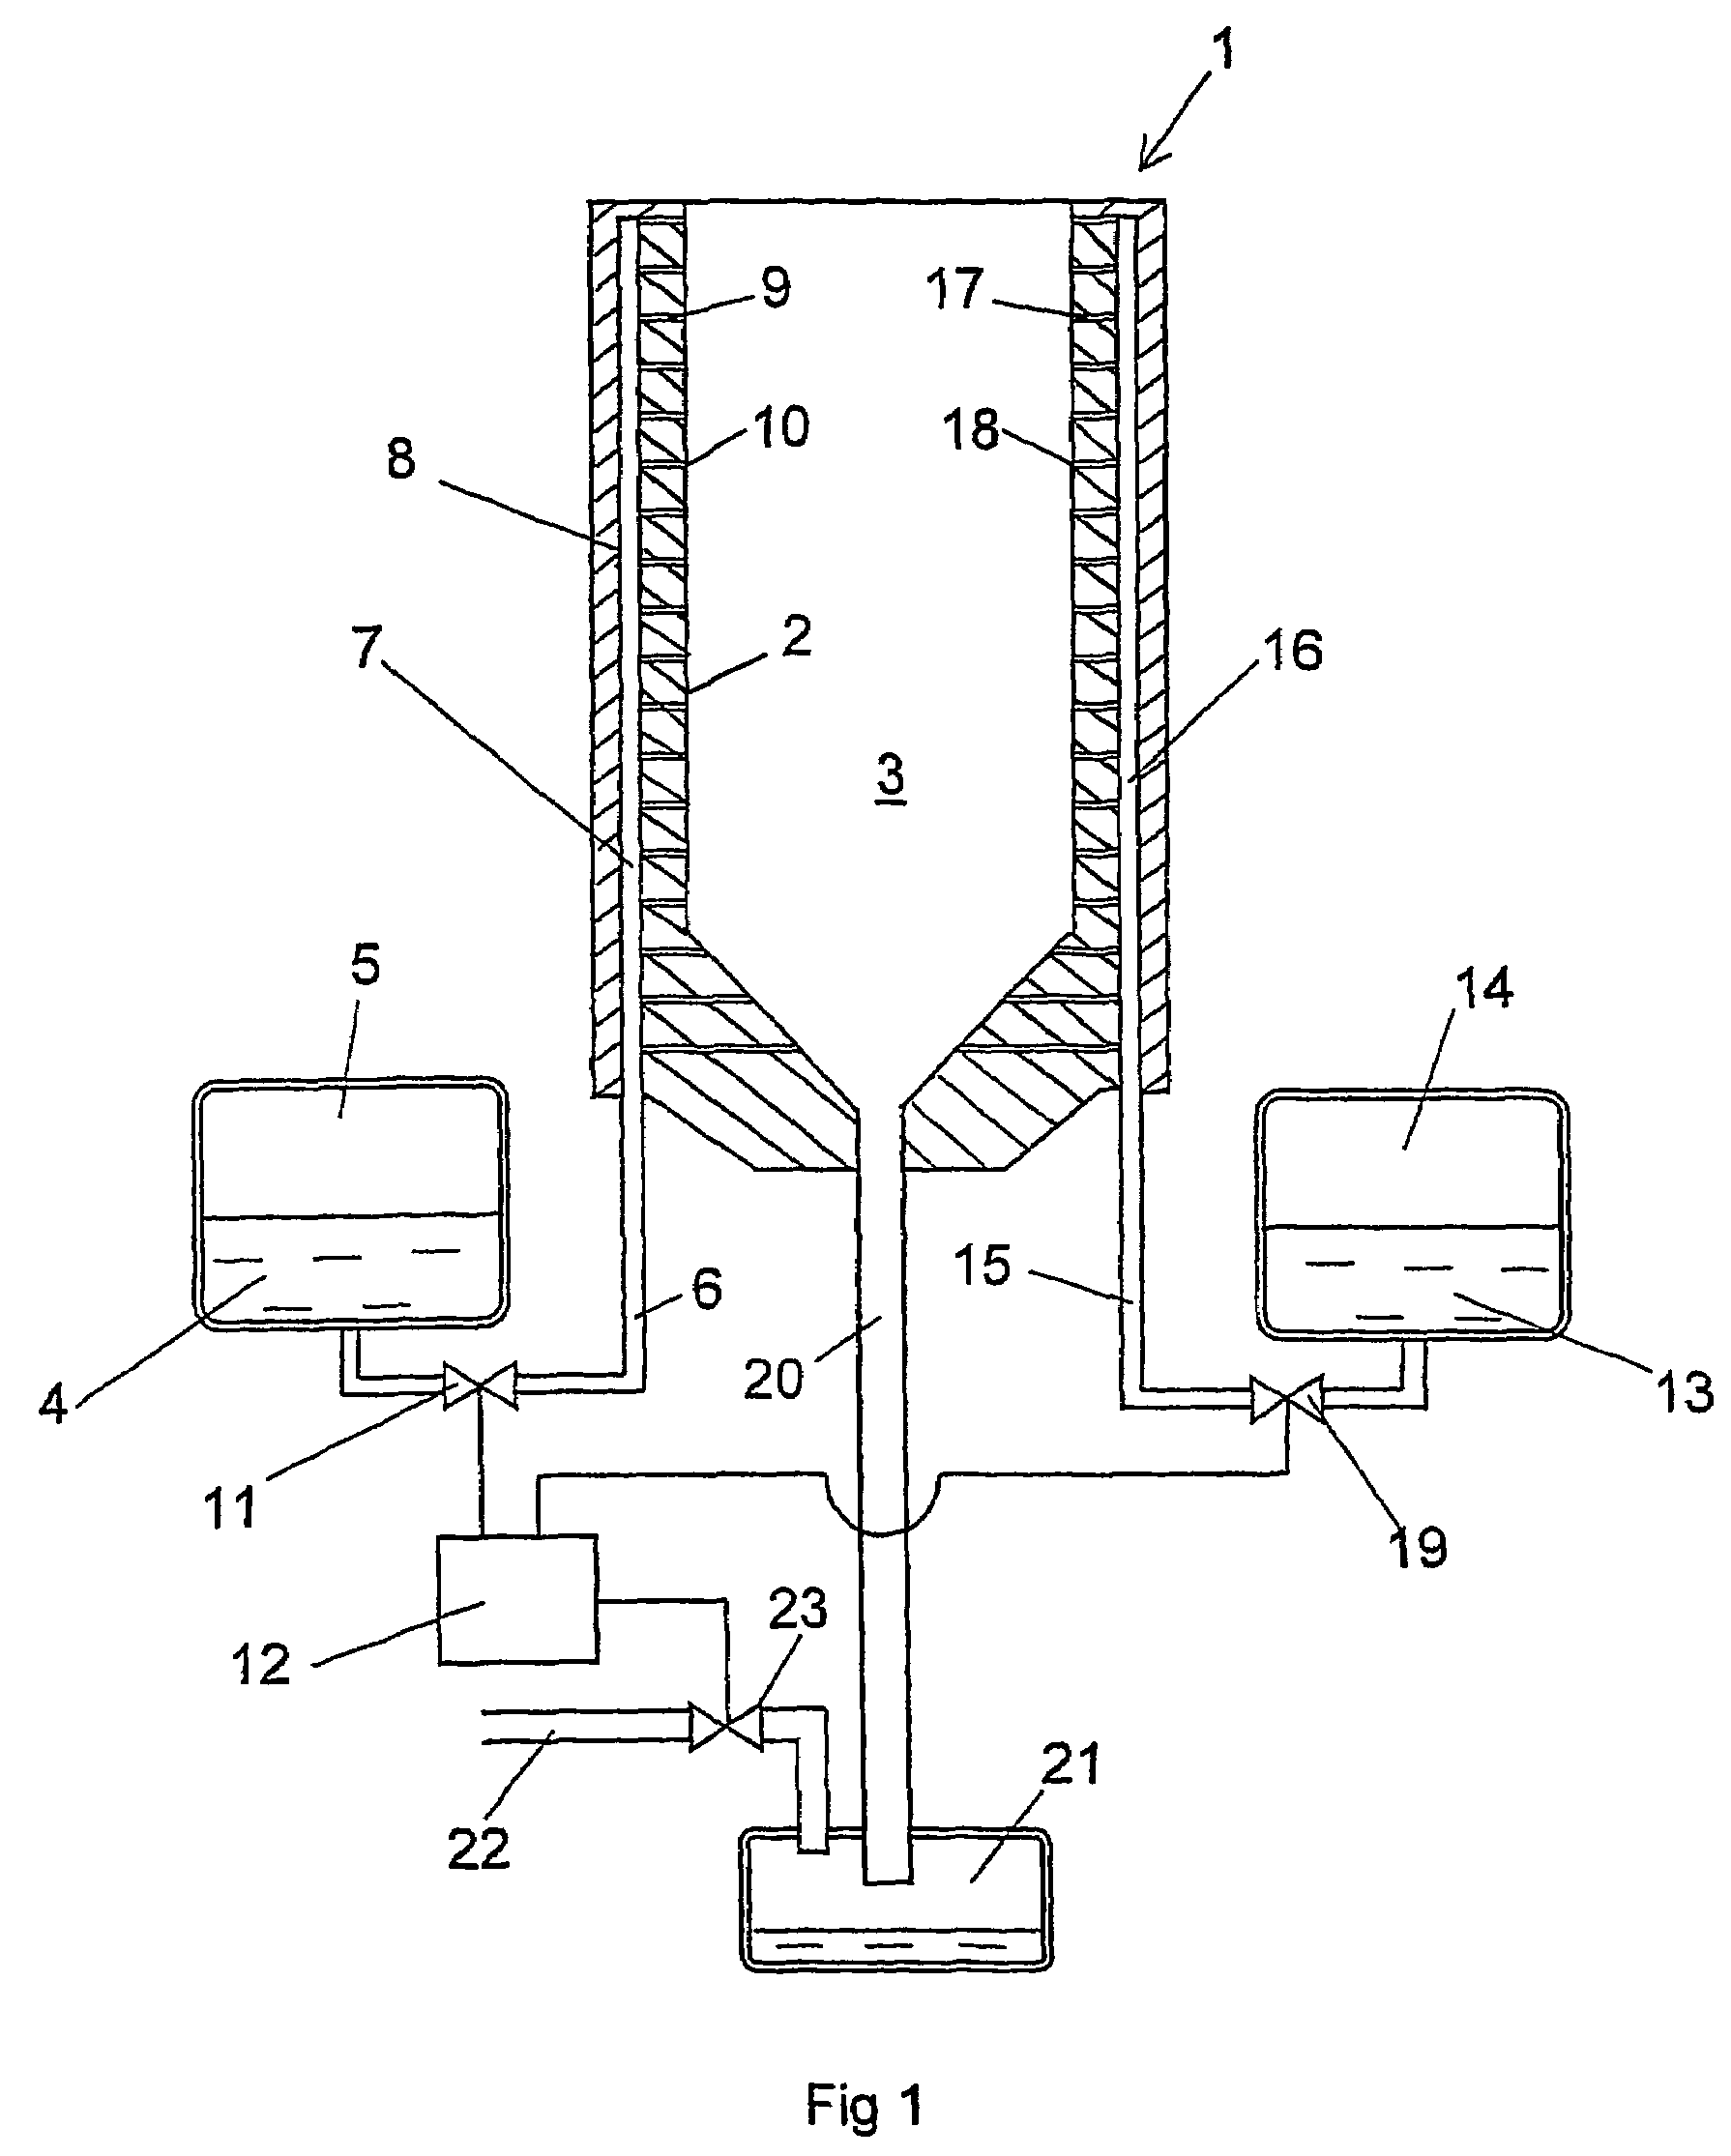 Device and a method for allowing performance of several separate treatments of a teat of an animal